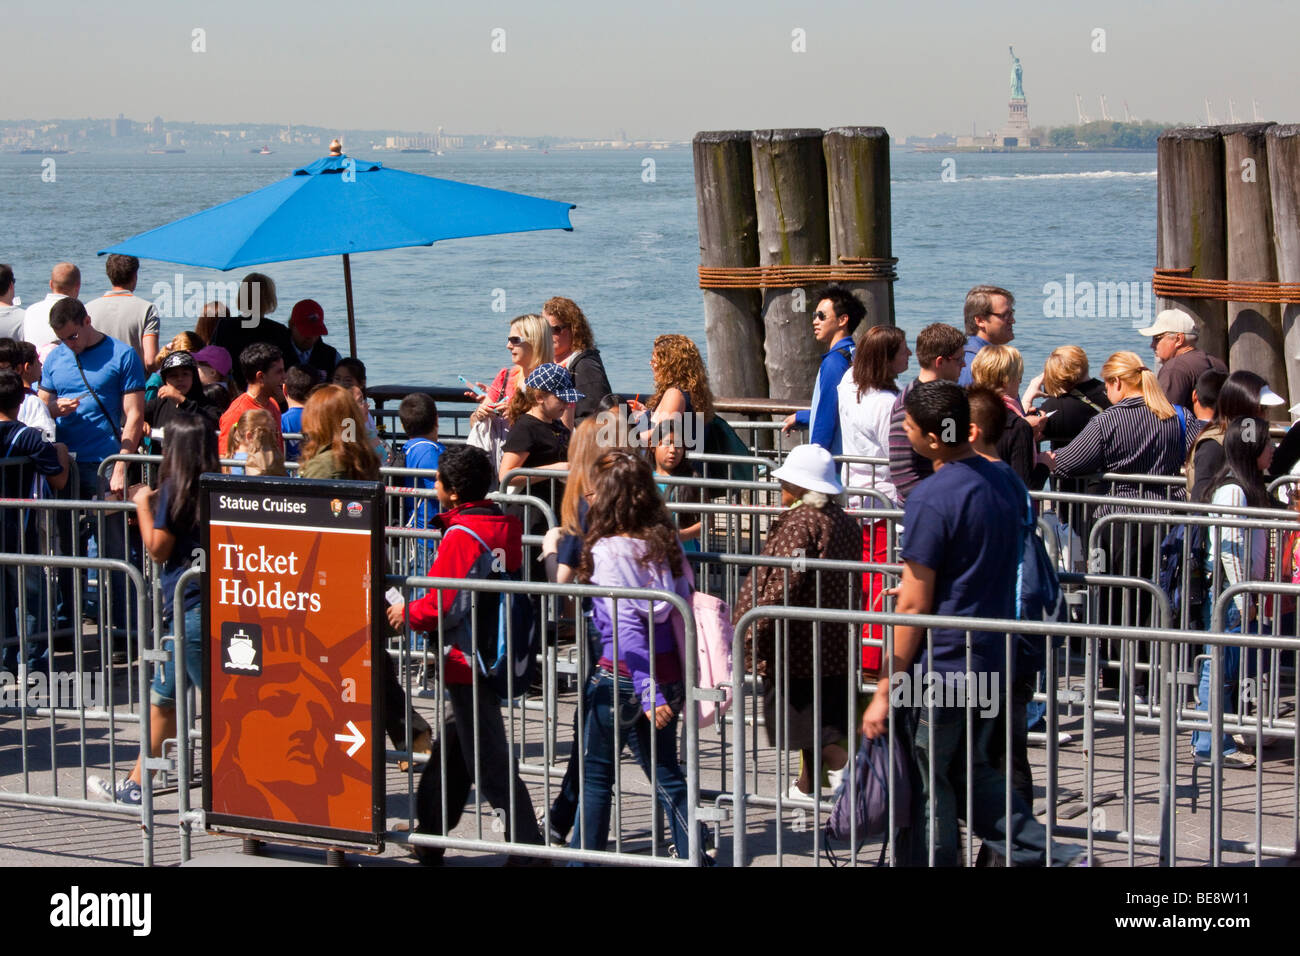 Statue Cruises line for the Ferry to the Statue of Liberty in New York City Stock Photo